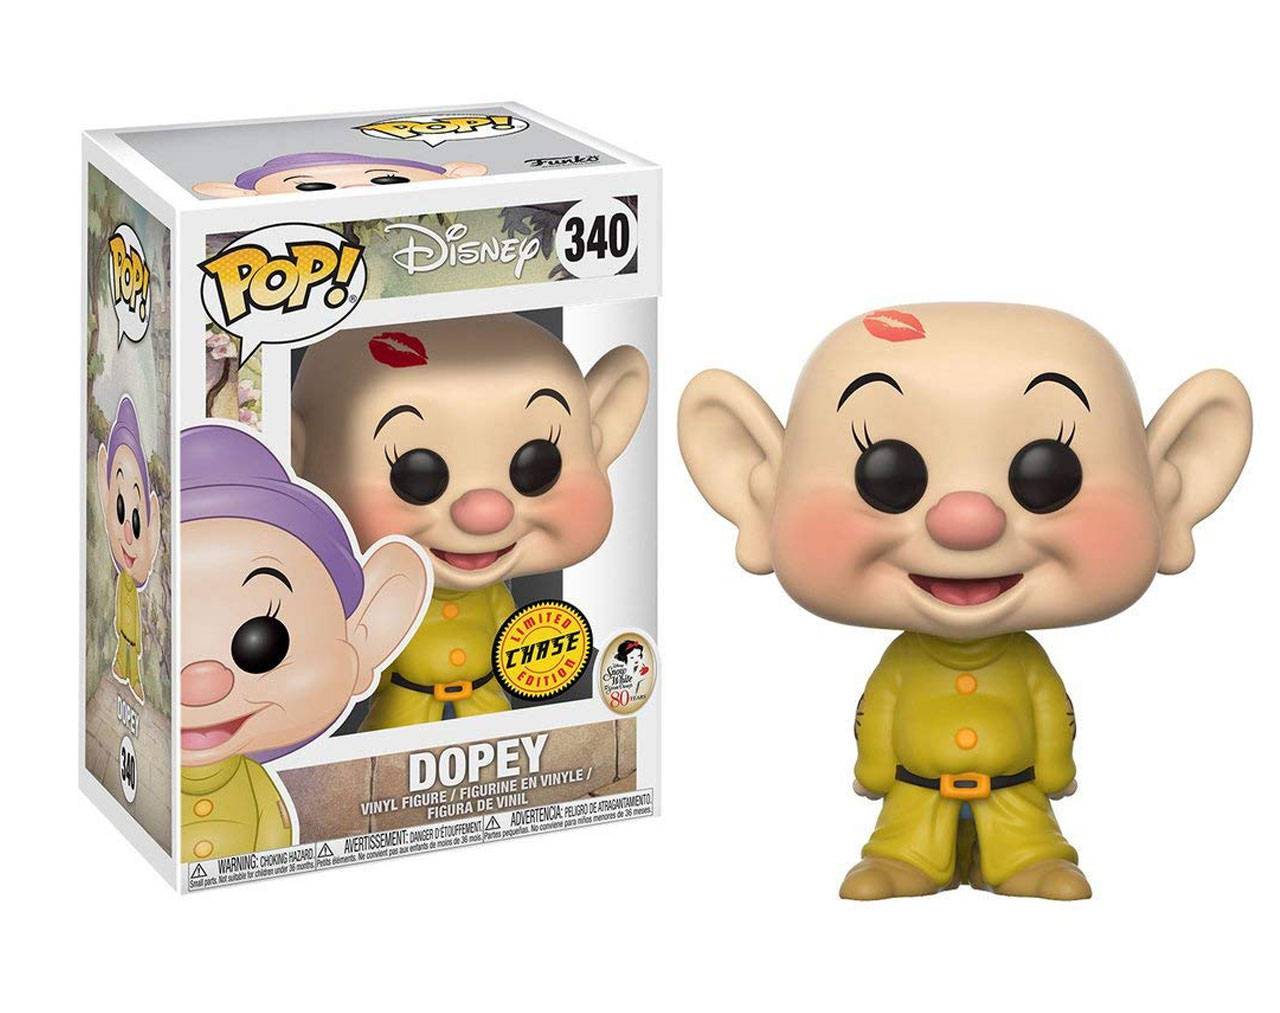 Dopey Chase Edition - Snow White and the Seven Dwarfs (80th Anniversary) Pop! Vinyl